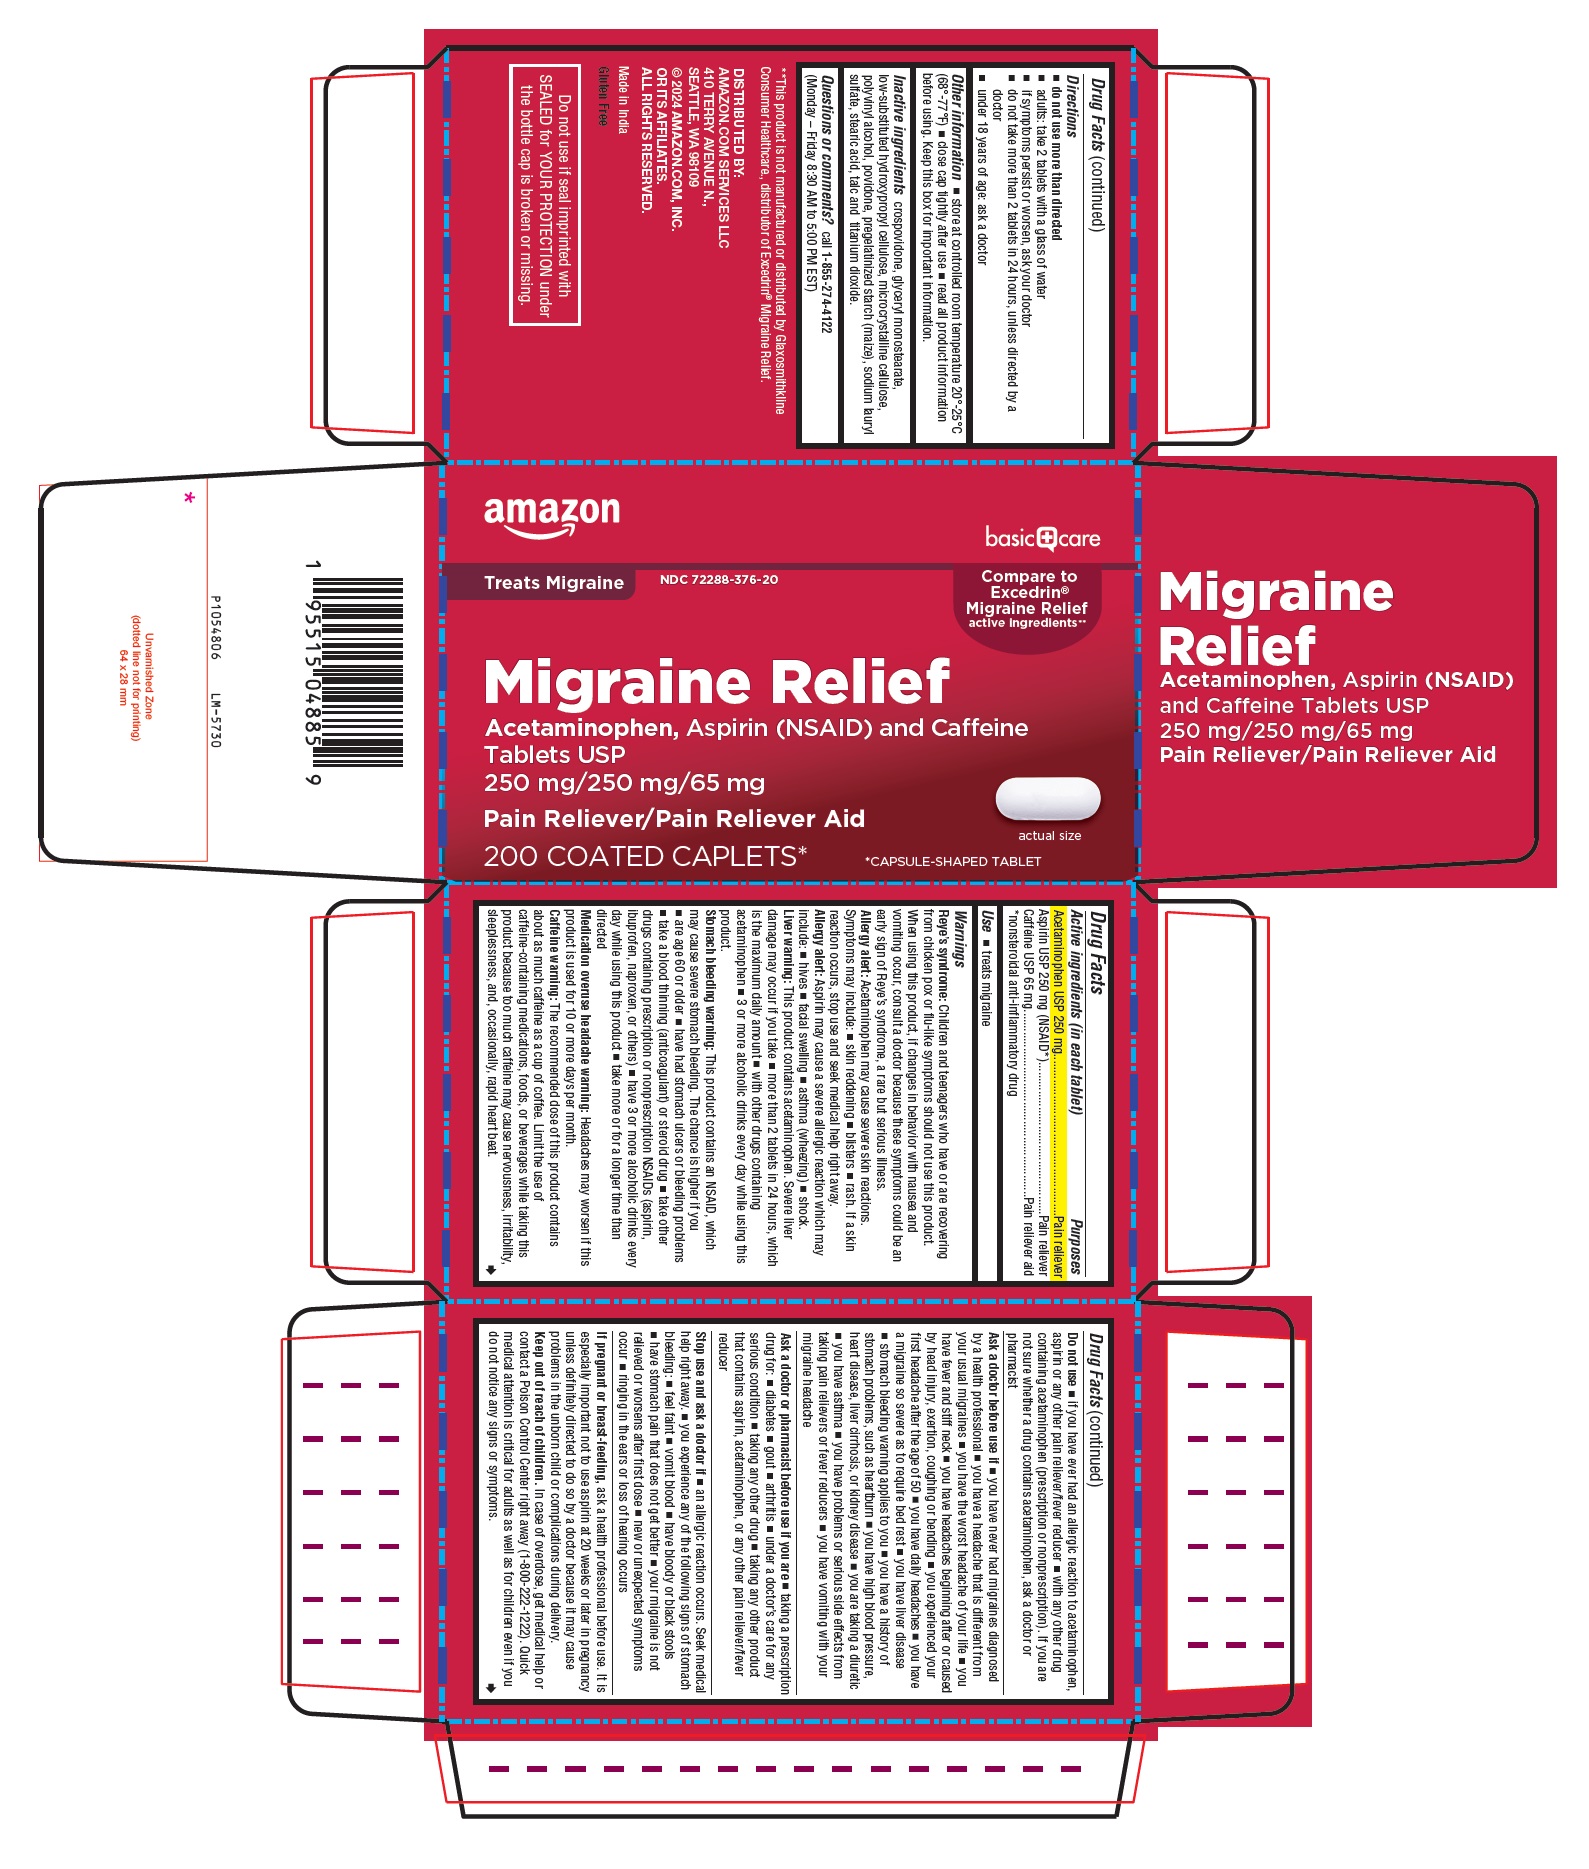 PACKAGE LABEL-PRINCIPAL DISPLAY PANEL - 250 mg/250 mg/65 mg Container Carton Label - 200 Caplets